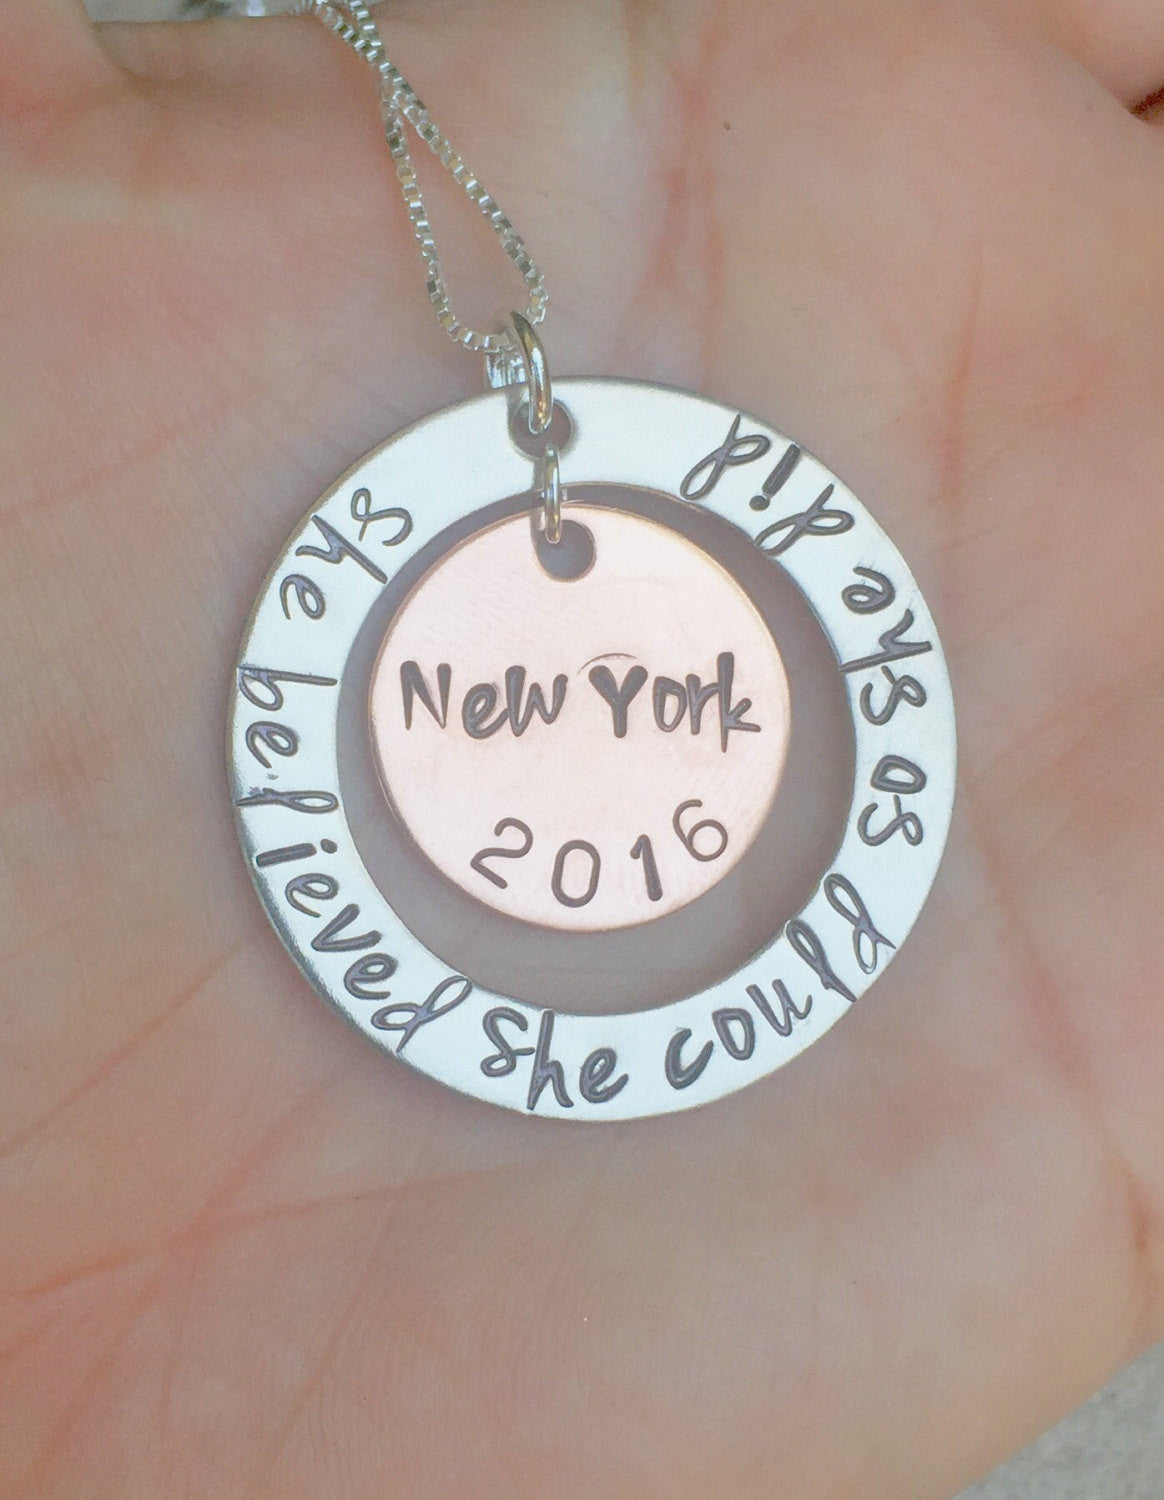 She Believed She Could So She Did Necklace - Natashaaloha, jewelry, bracelets, necklace, keychains, fishing lures, gifts for men, charms, personalized, 